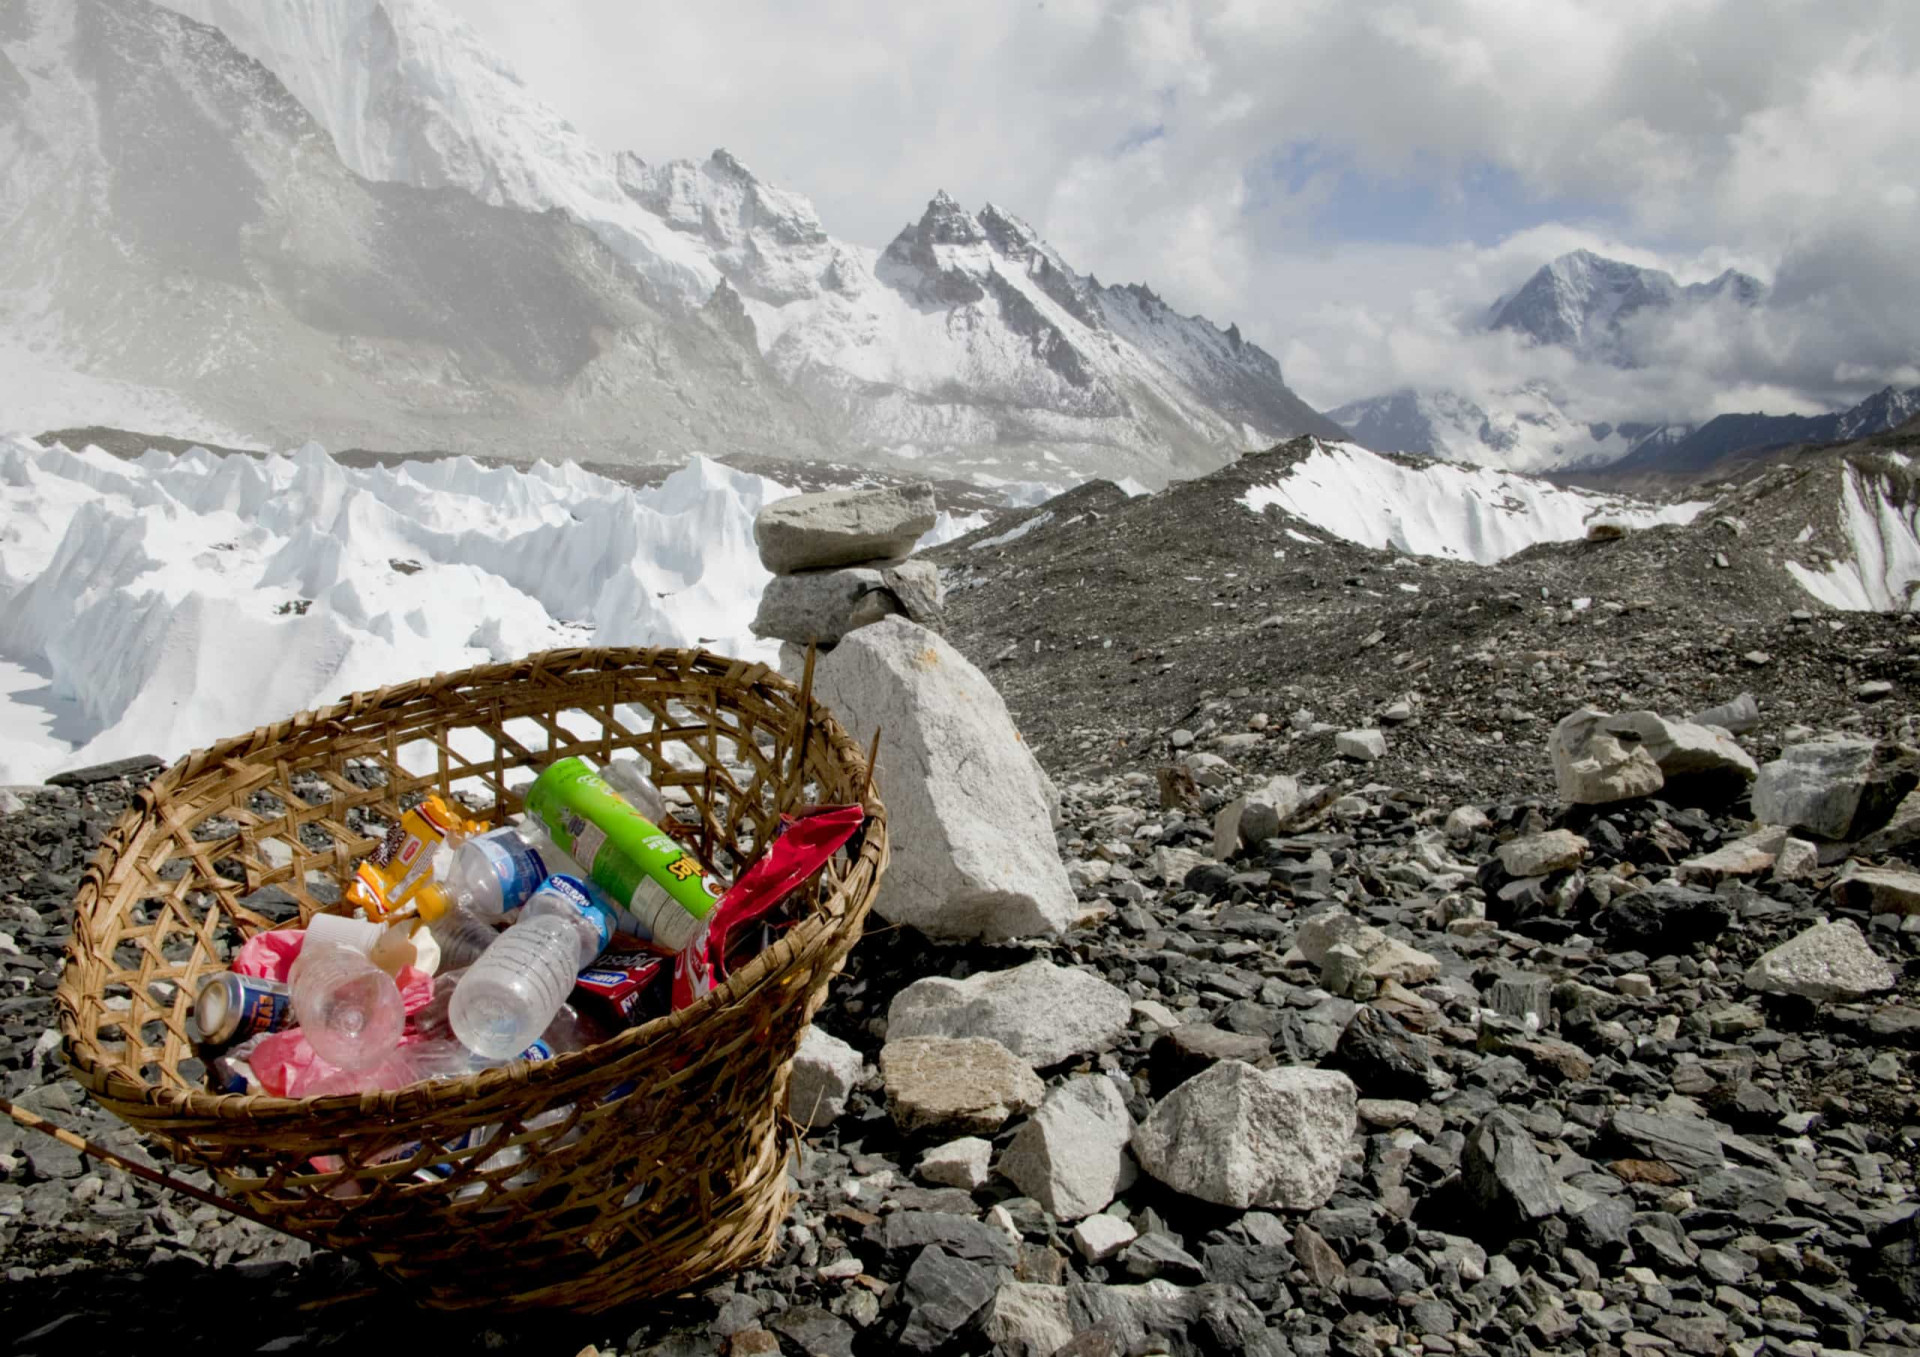 <p>One Mount Everest base camp on the Tibetan side of the famous peak is now closed to tourists after the trash left by visitors reached unsustainable levels. Garbage found strewn across the formally pristine landscape included human feces and climbing equipment.</p><p><a href="https://www.msn.com/en-my/community/channel/vid-7xx8mnucu55yw63we9va2gwr7uihbxwc68fxqp25x6tg4ftibpra?cvid=94631541bc0f4f89bfd59158d696ad7e">Follow us and access great exclusive content every day</a></p>